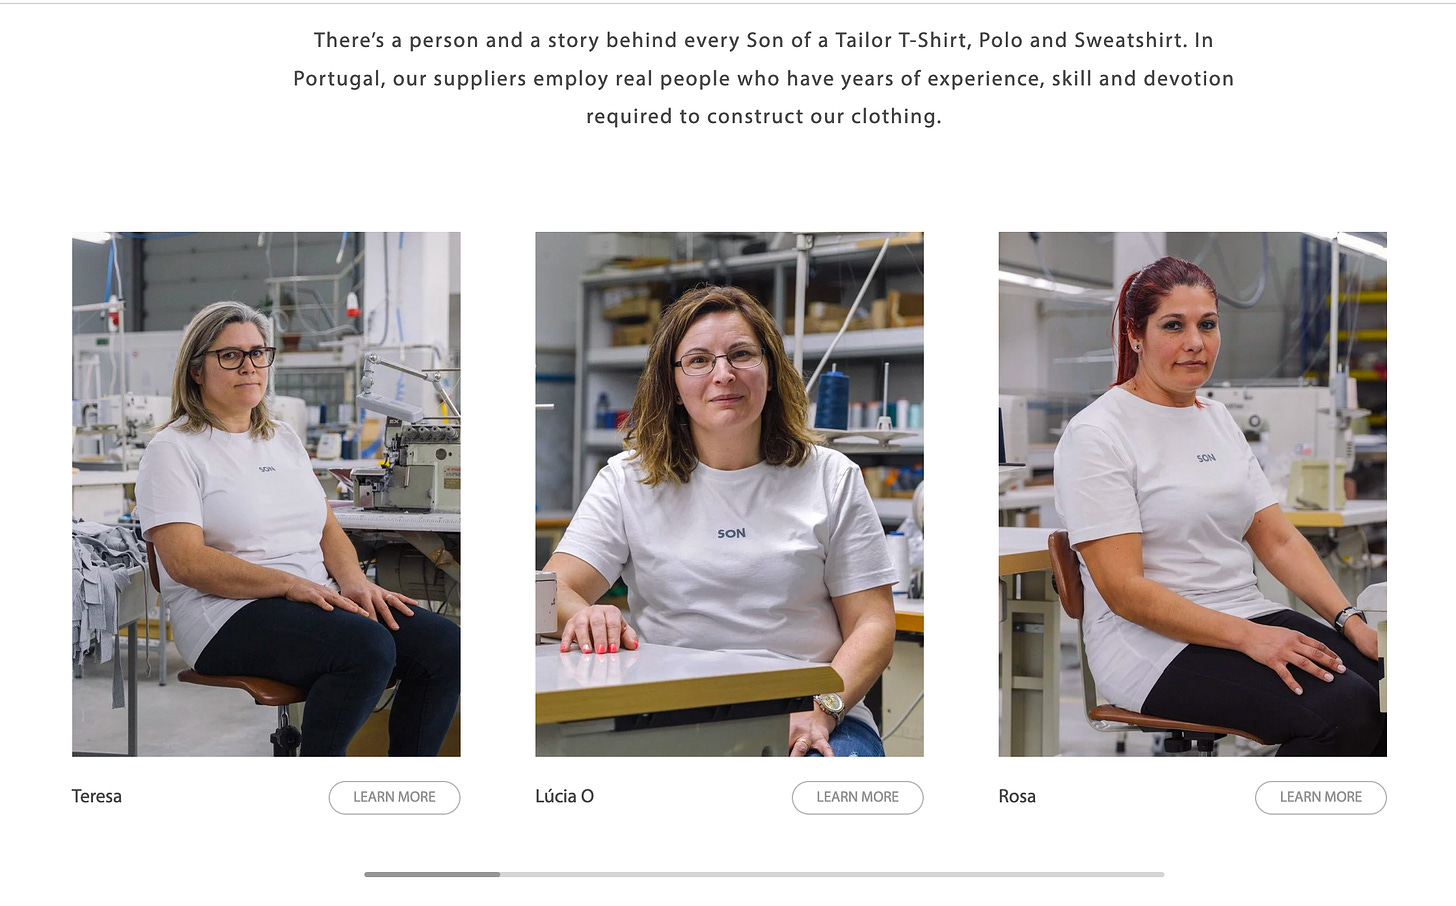 Meet The People Behind The Garments  There’s a person and a story behind every Son of a Tailor T-Shirt, Polo and Sweatshirt. In Portugal, our suppliers employ real people who have years of experience, skill and devotion required to construct our clothing. 